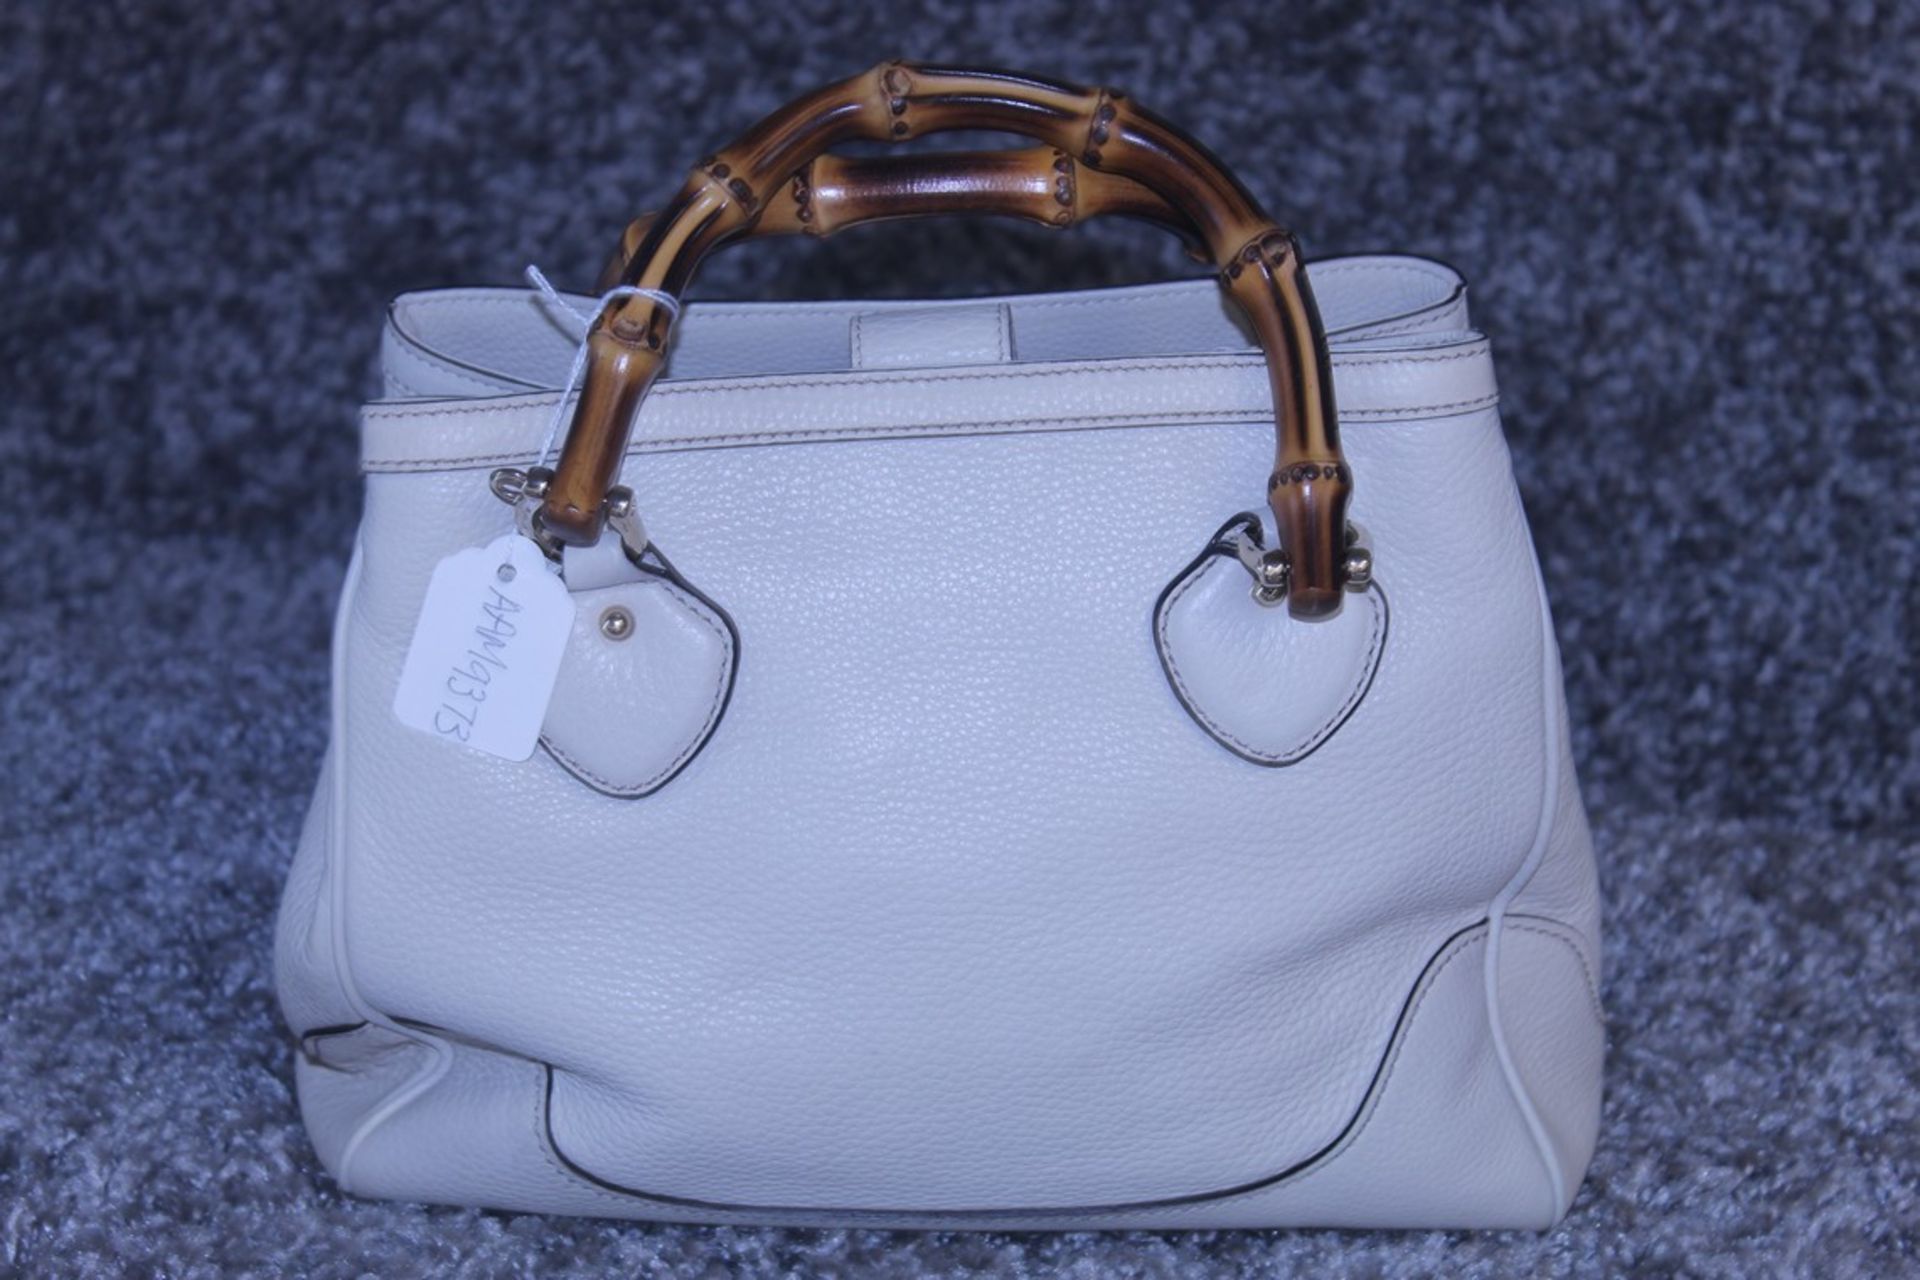 Rrp £1250 Gucci Calf Leather/Grained Leather Bamboo Tote Luxury Womens Ivory Handbag With Gold - Image 2 of 4